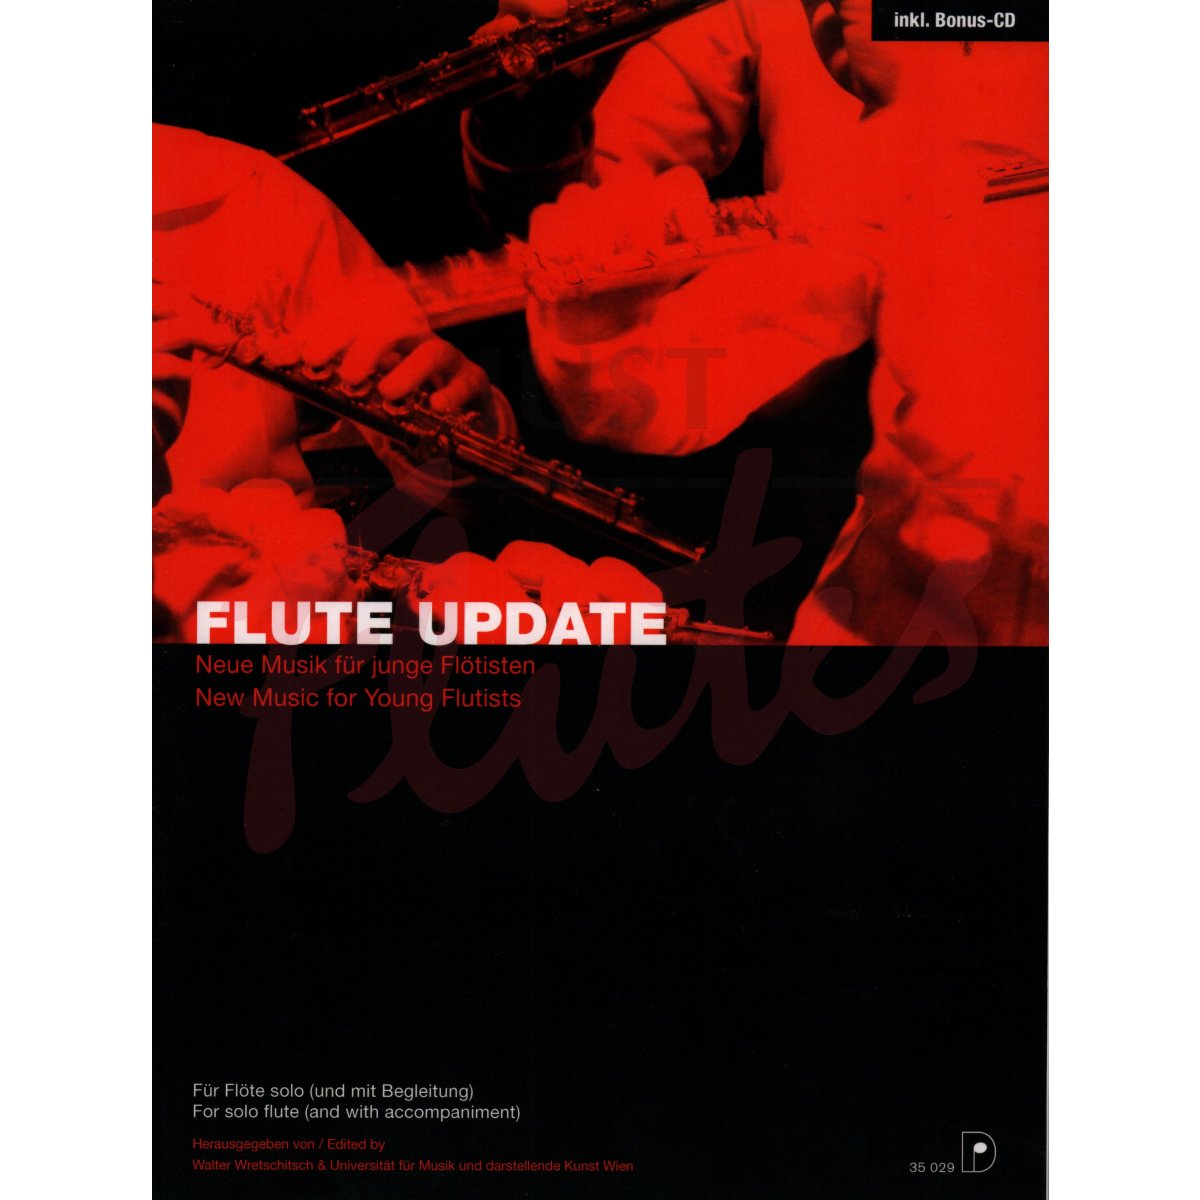 Flute Update - New Music for Young Flutists